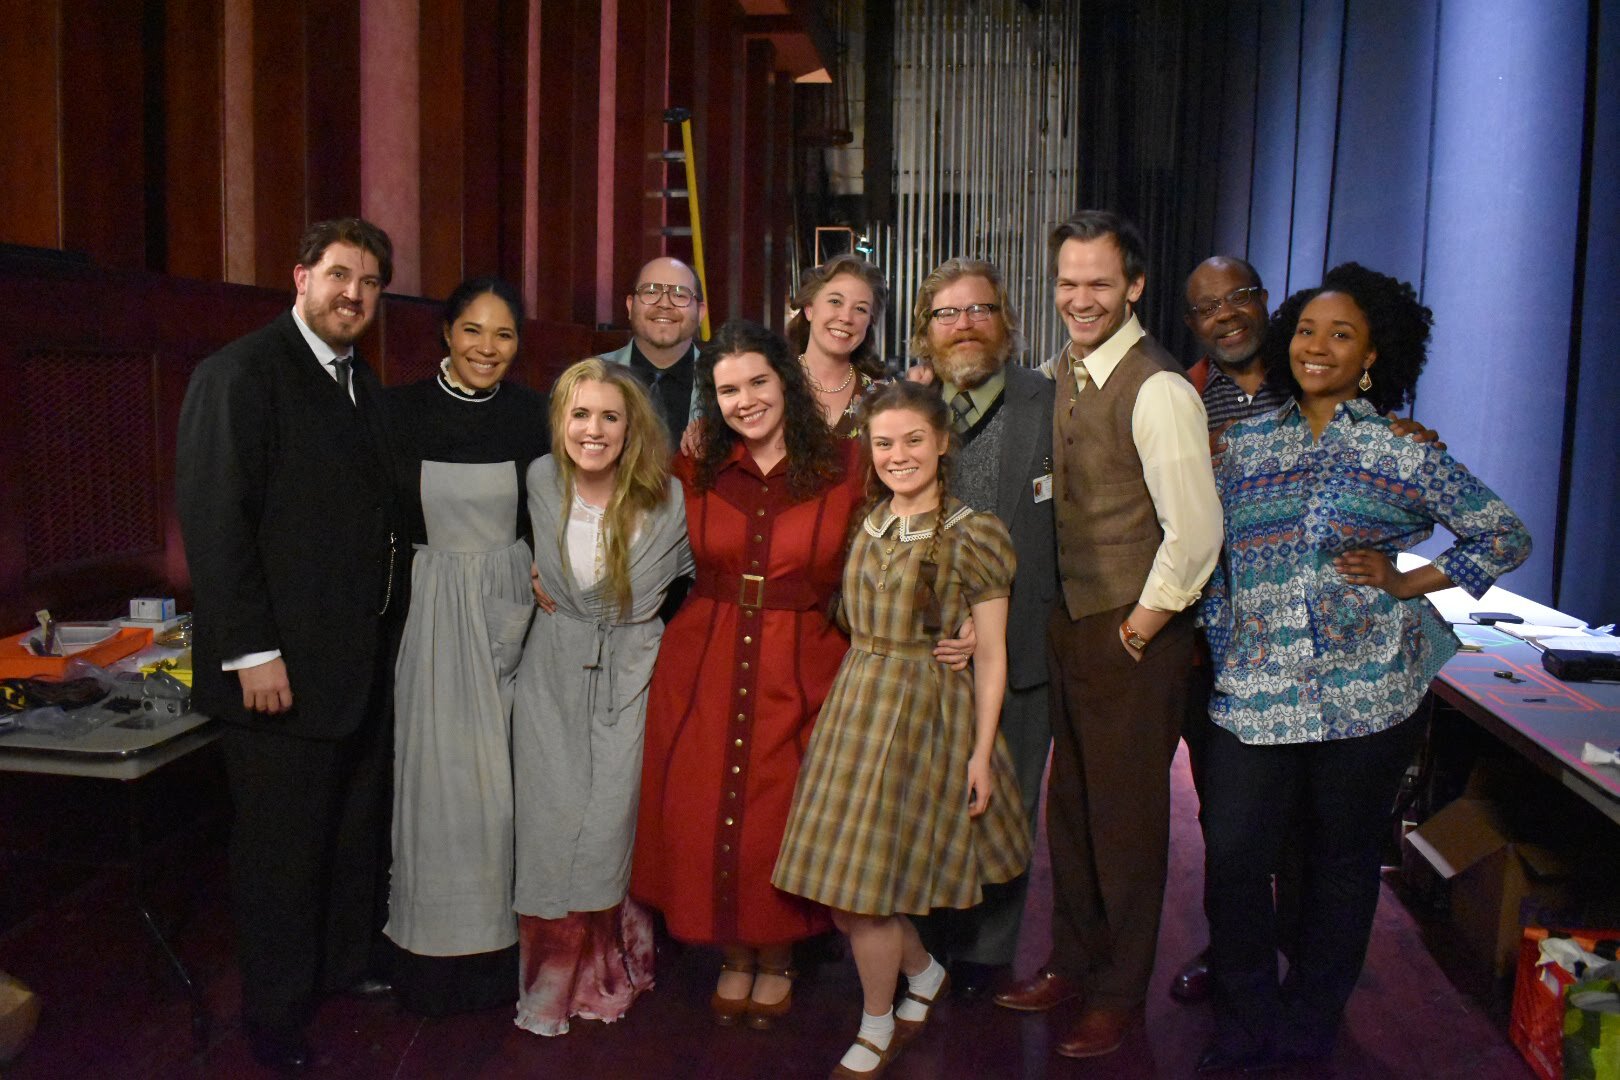  Full cast picture after the final dress rehearsal of   The Flood   with Opera Columbus 